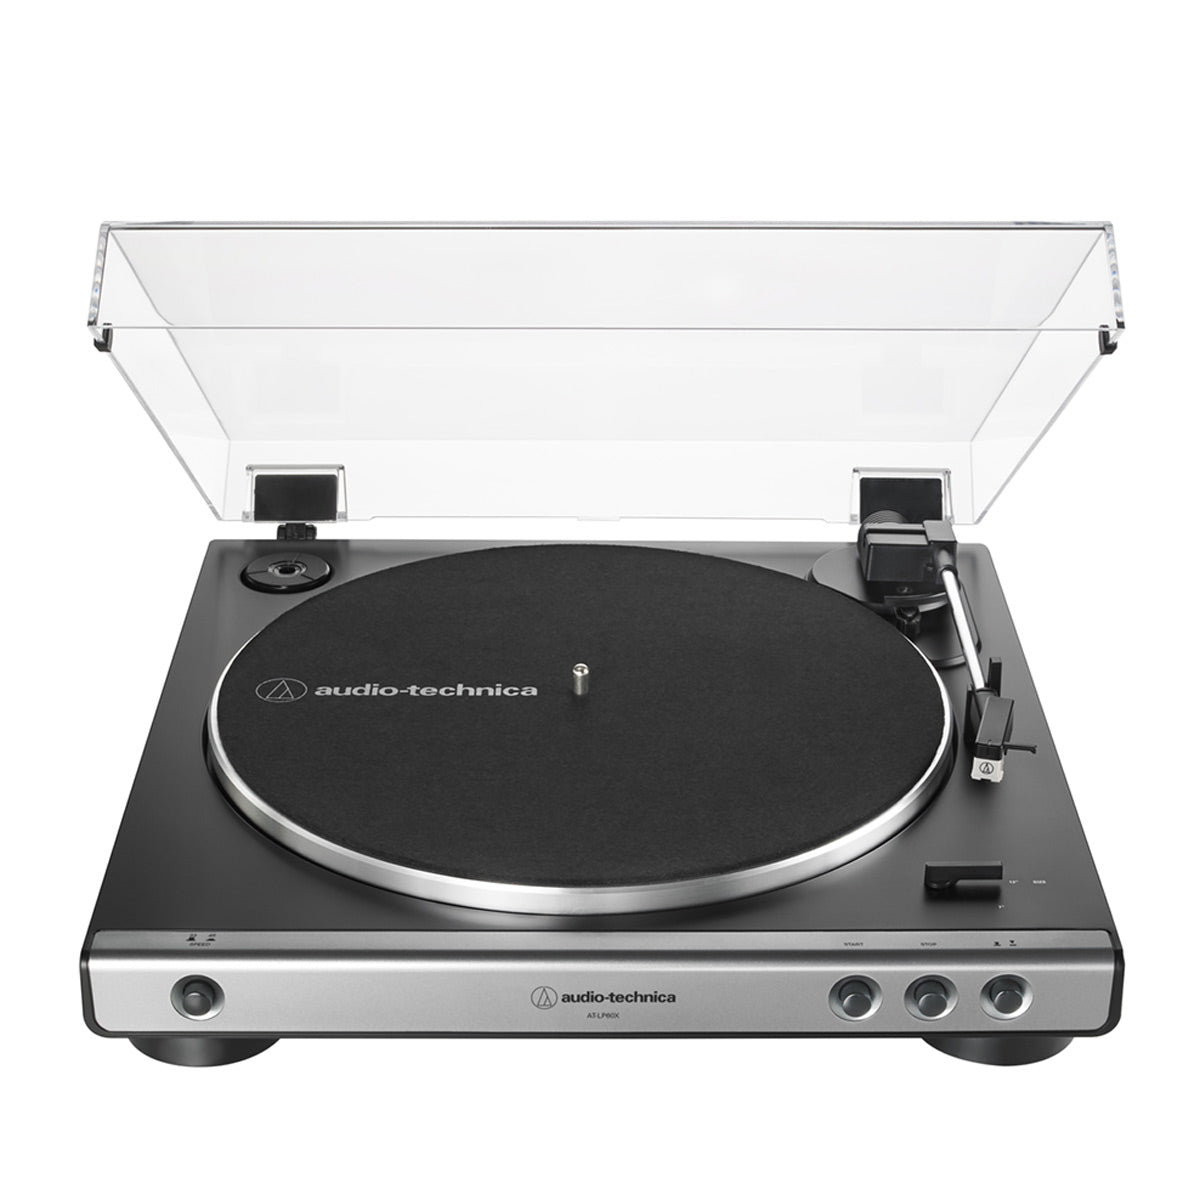 Audio-Technica AT-LP60X-GM Fully Automatic Belt-Drive Stereo Turntable (Gunmetal/Black) with Heritage Record Preservative & Cleaning Kit